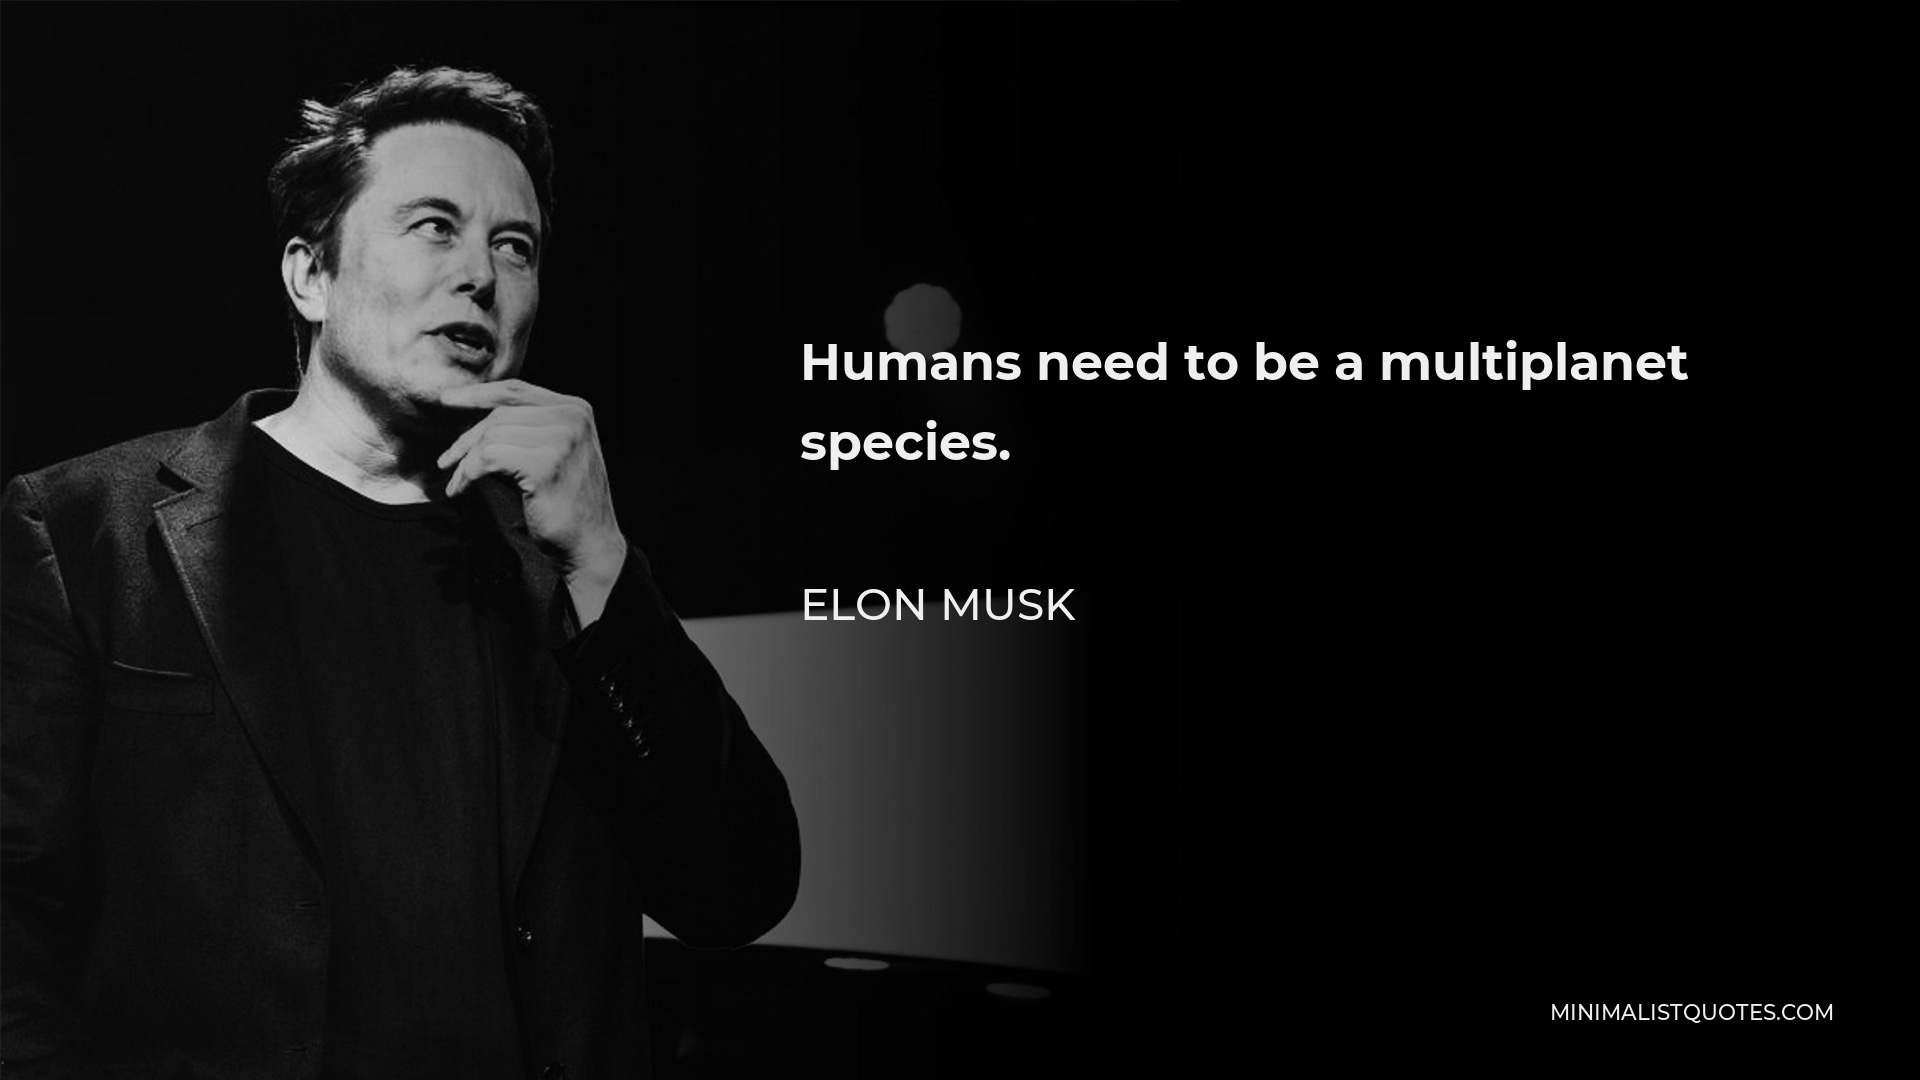 Elon Musk Quote - Humans need to be a multiplanet species.